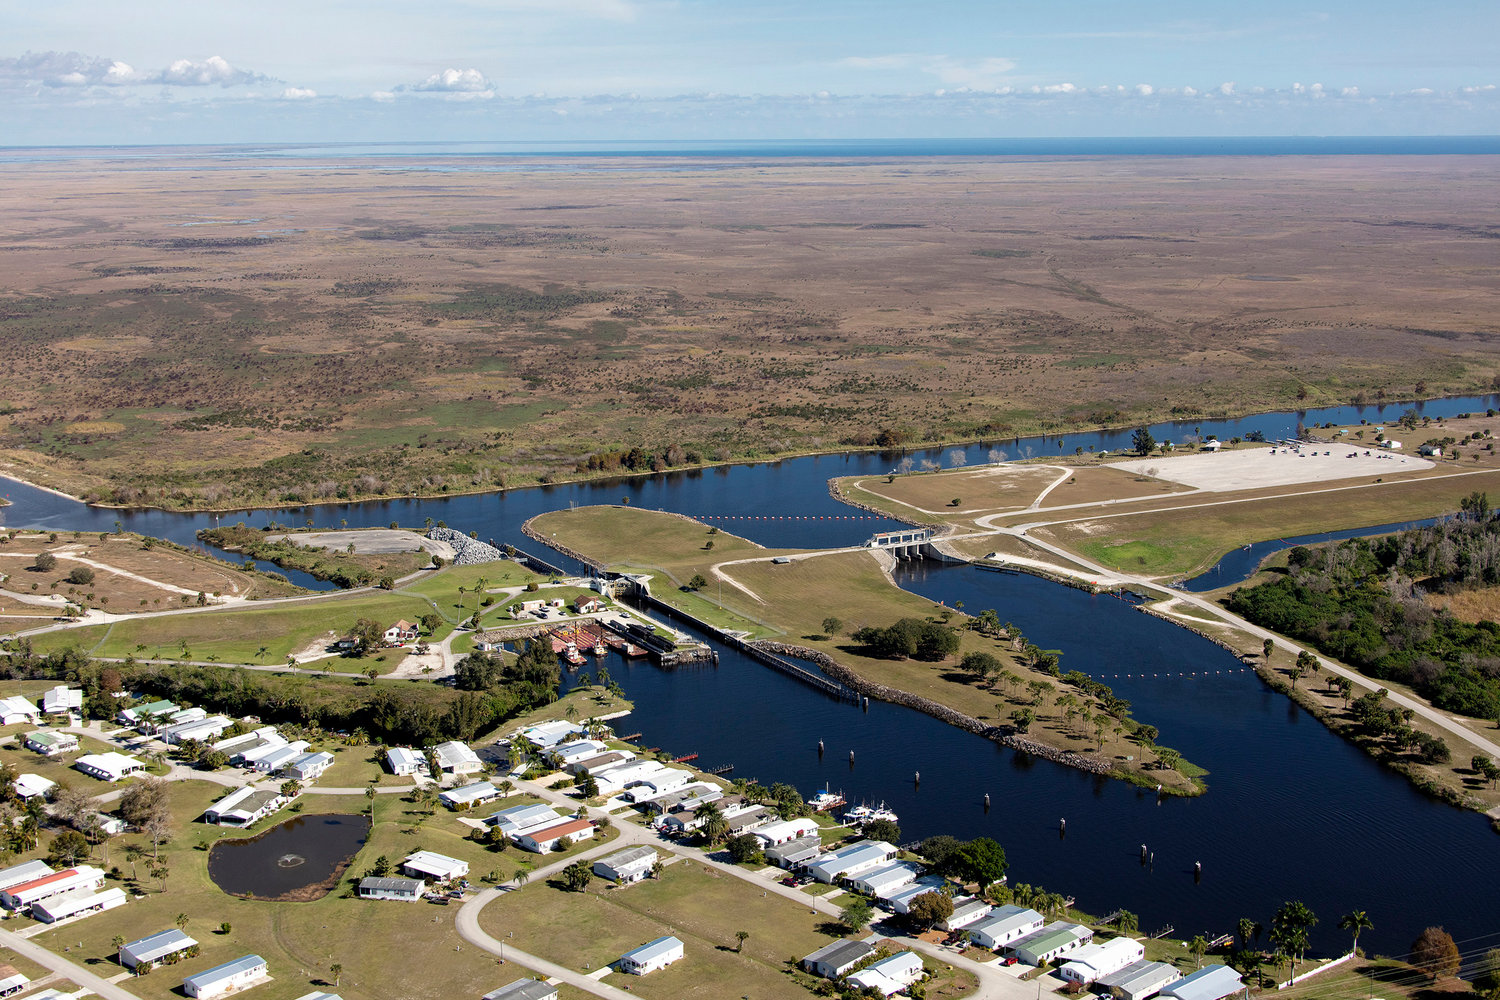 MOORE HAVEN — No water from the lake will be released this week to the Caloosahatchee River through the Moore Haven Lock.